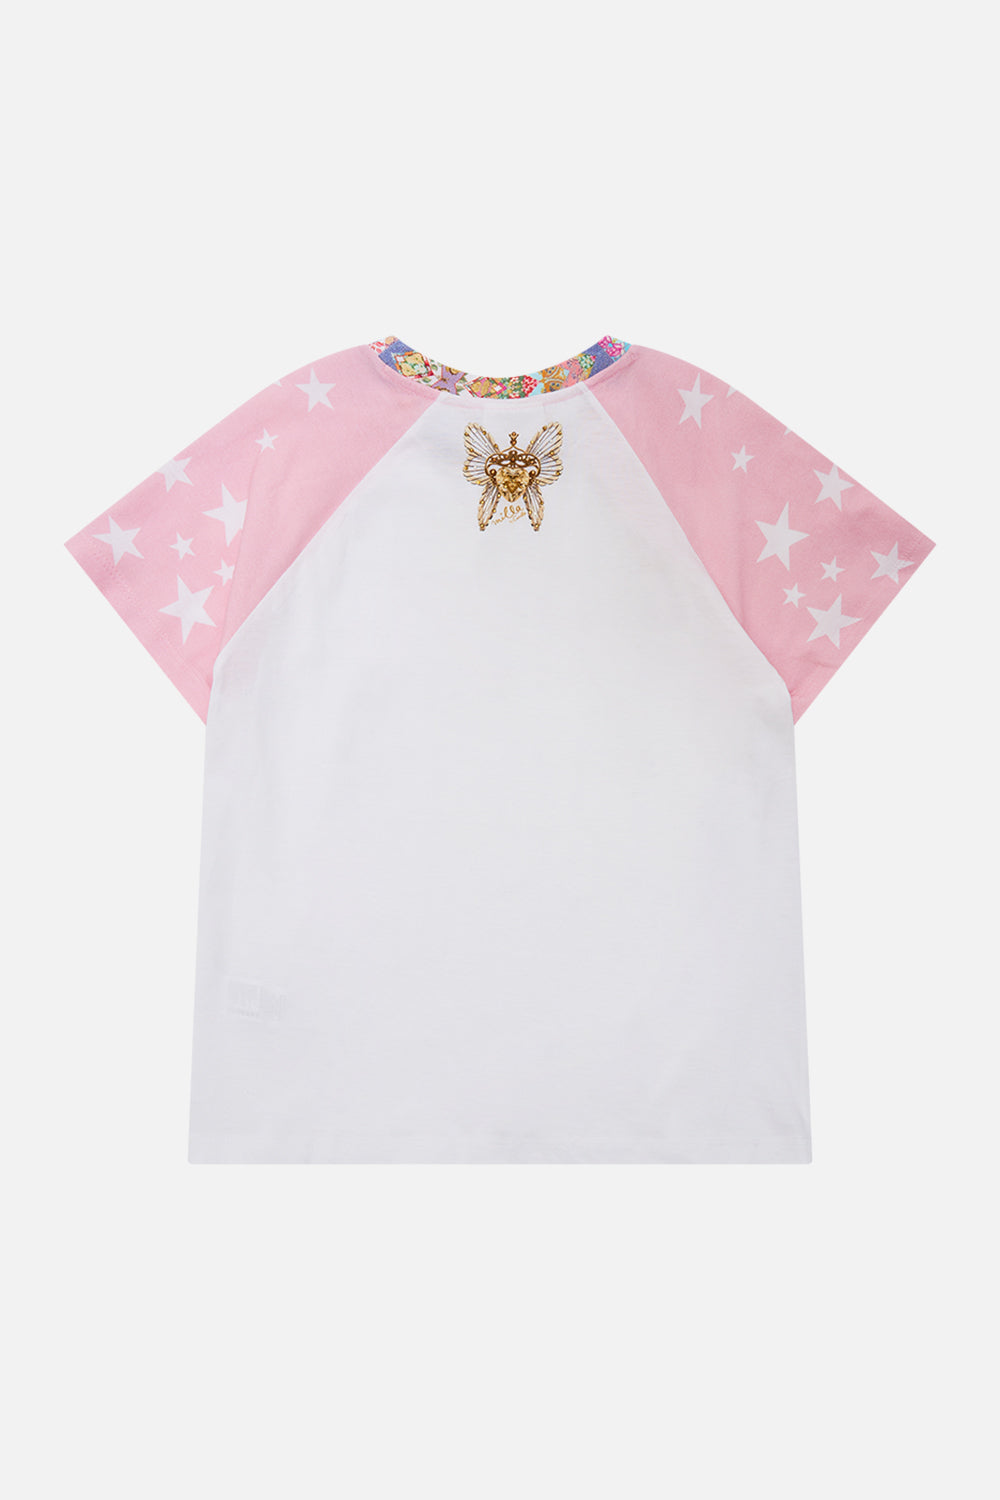 Milla by CAMILLA floral kids raglan tee (12-14) in Sew Yesterday